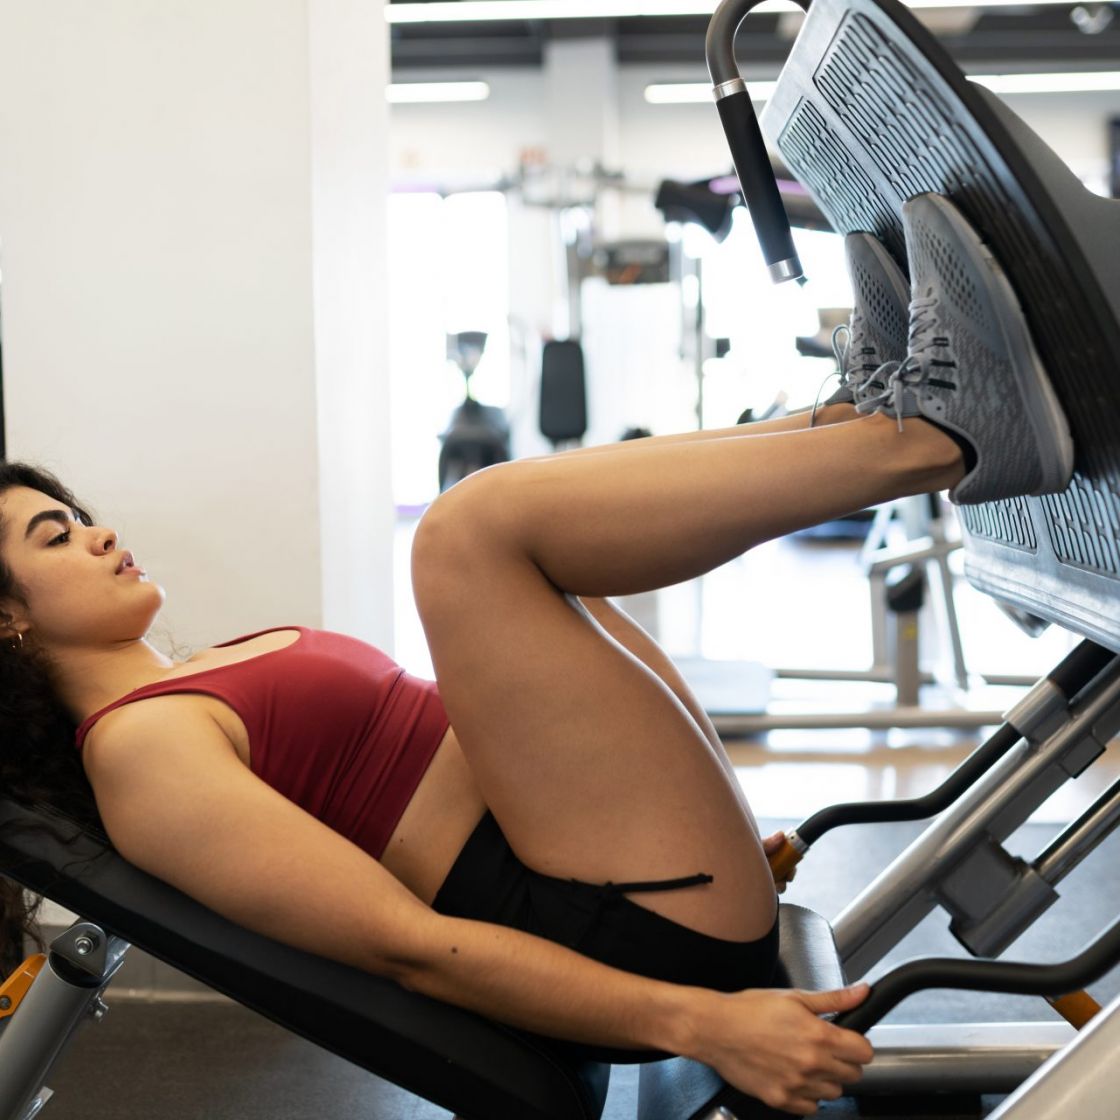 How to set up and use a lying leg press in a lower body workout